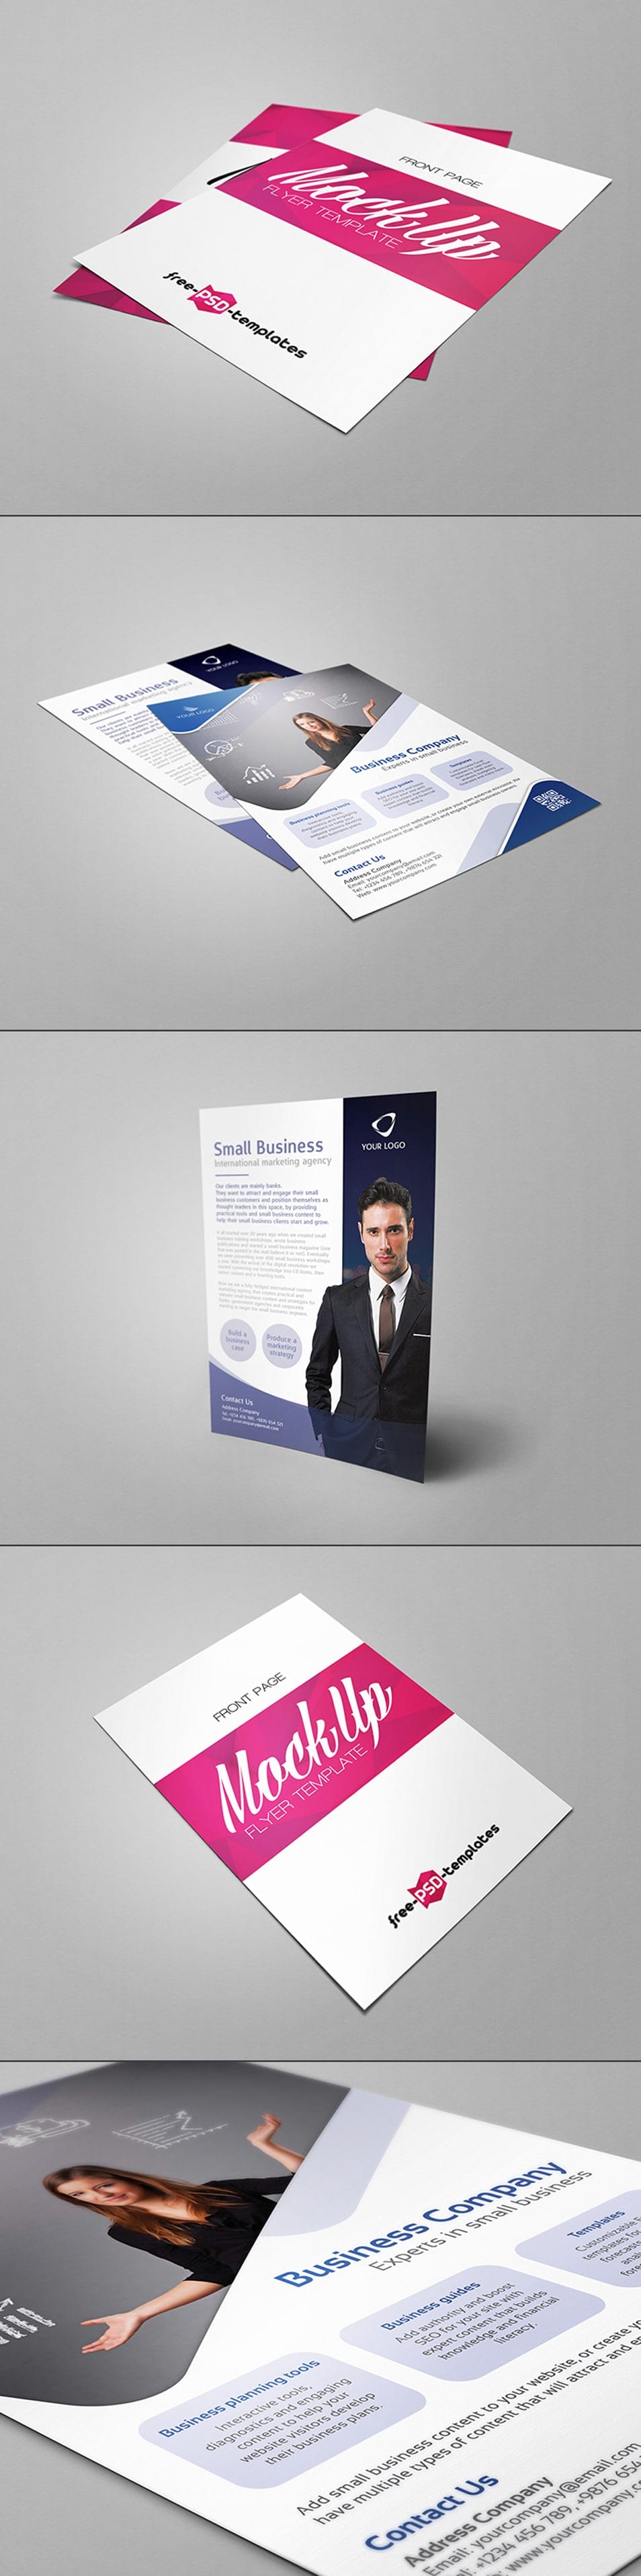 Free Flyer Mock-up in PSD